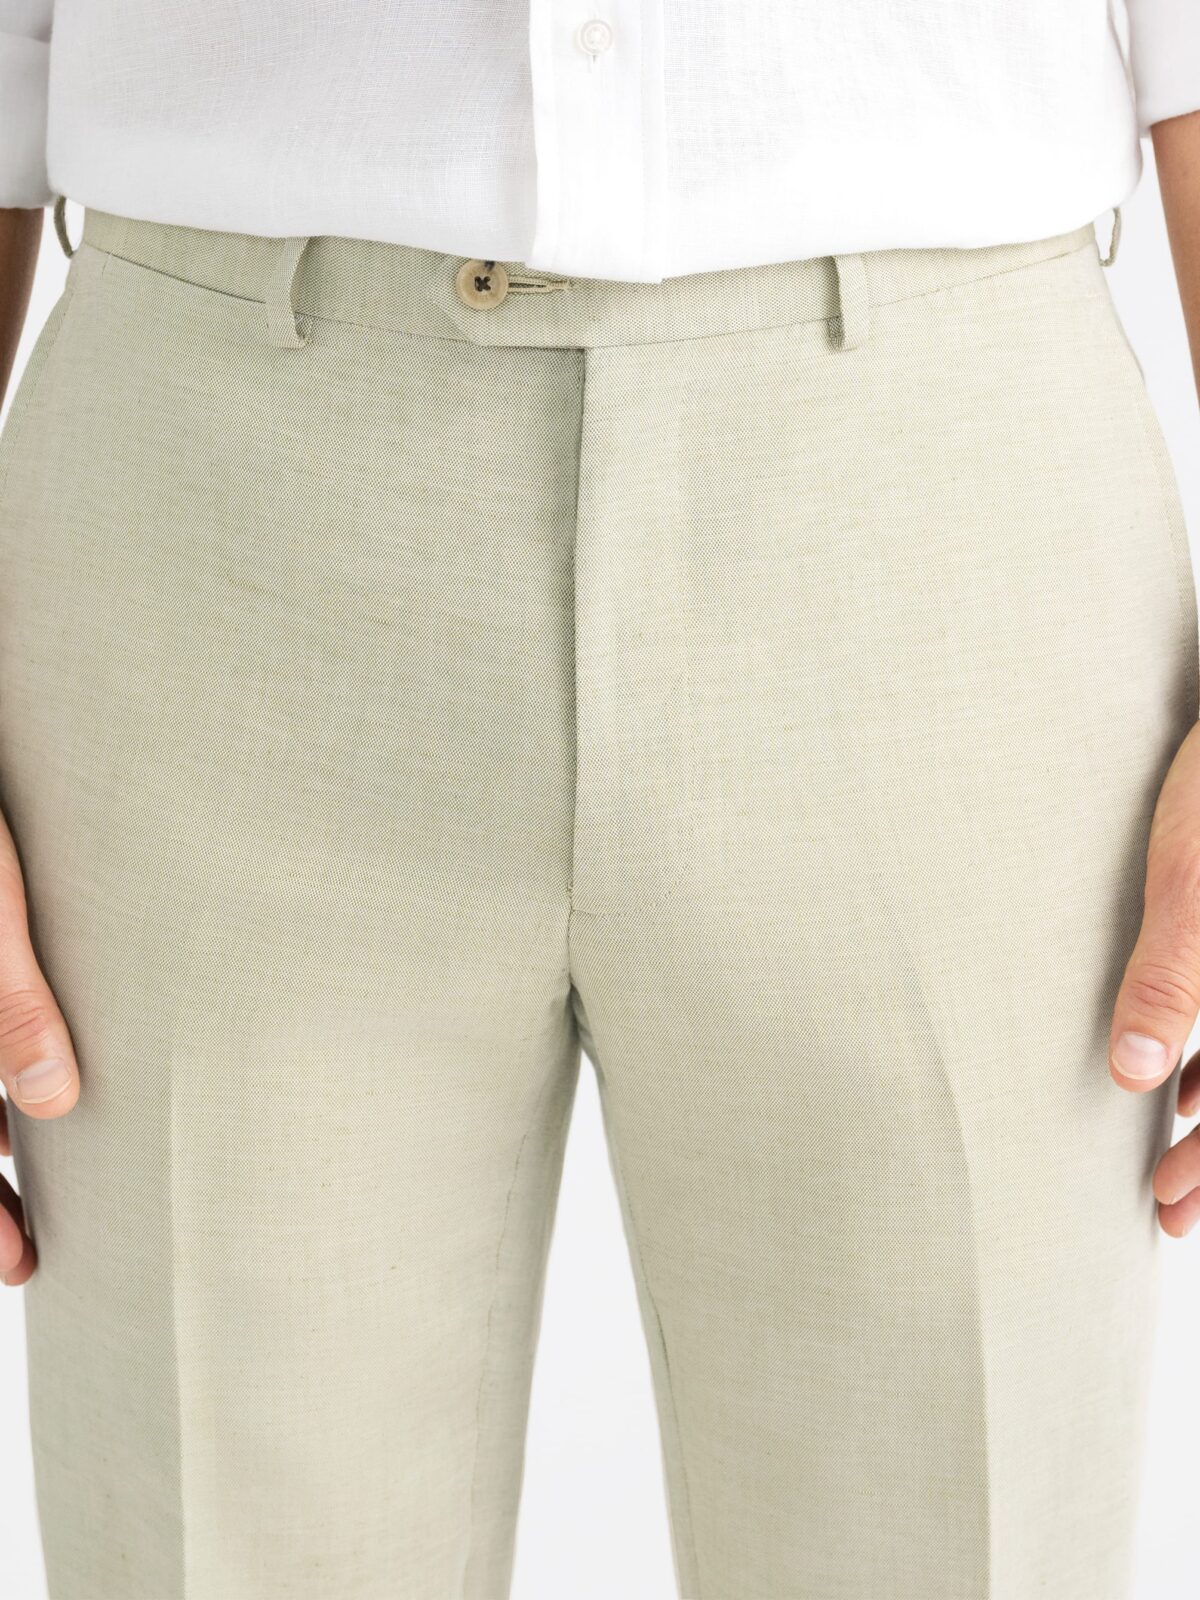 MAMA Before & After Linen-blend Shorts - Pistachio green - Ladies